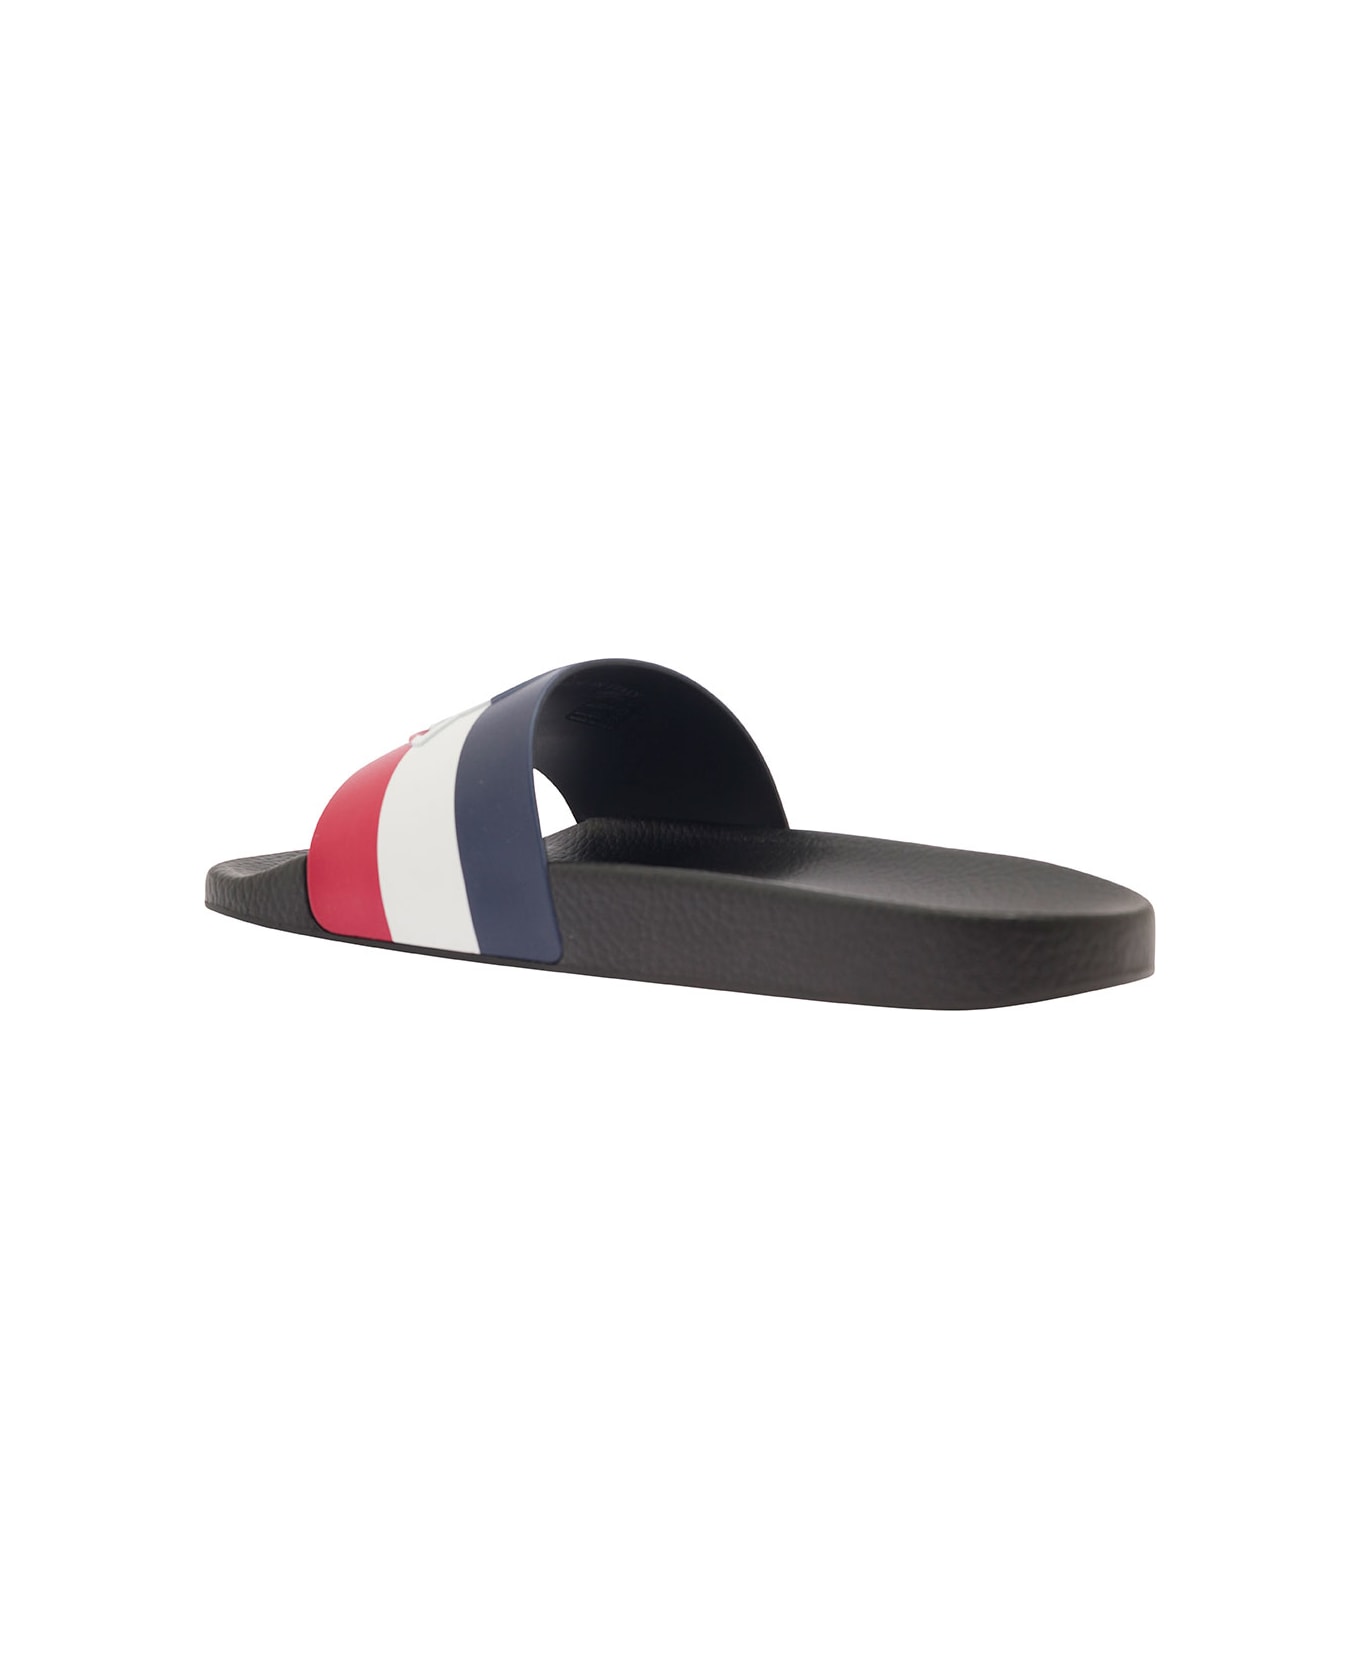 Moncler 'basile' Blue Slides With Tricolour Toe Strap In Rubber Man - Blu/rosso/bianco その他各種シューズ